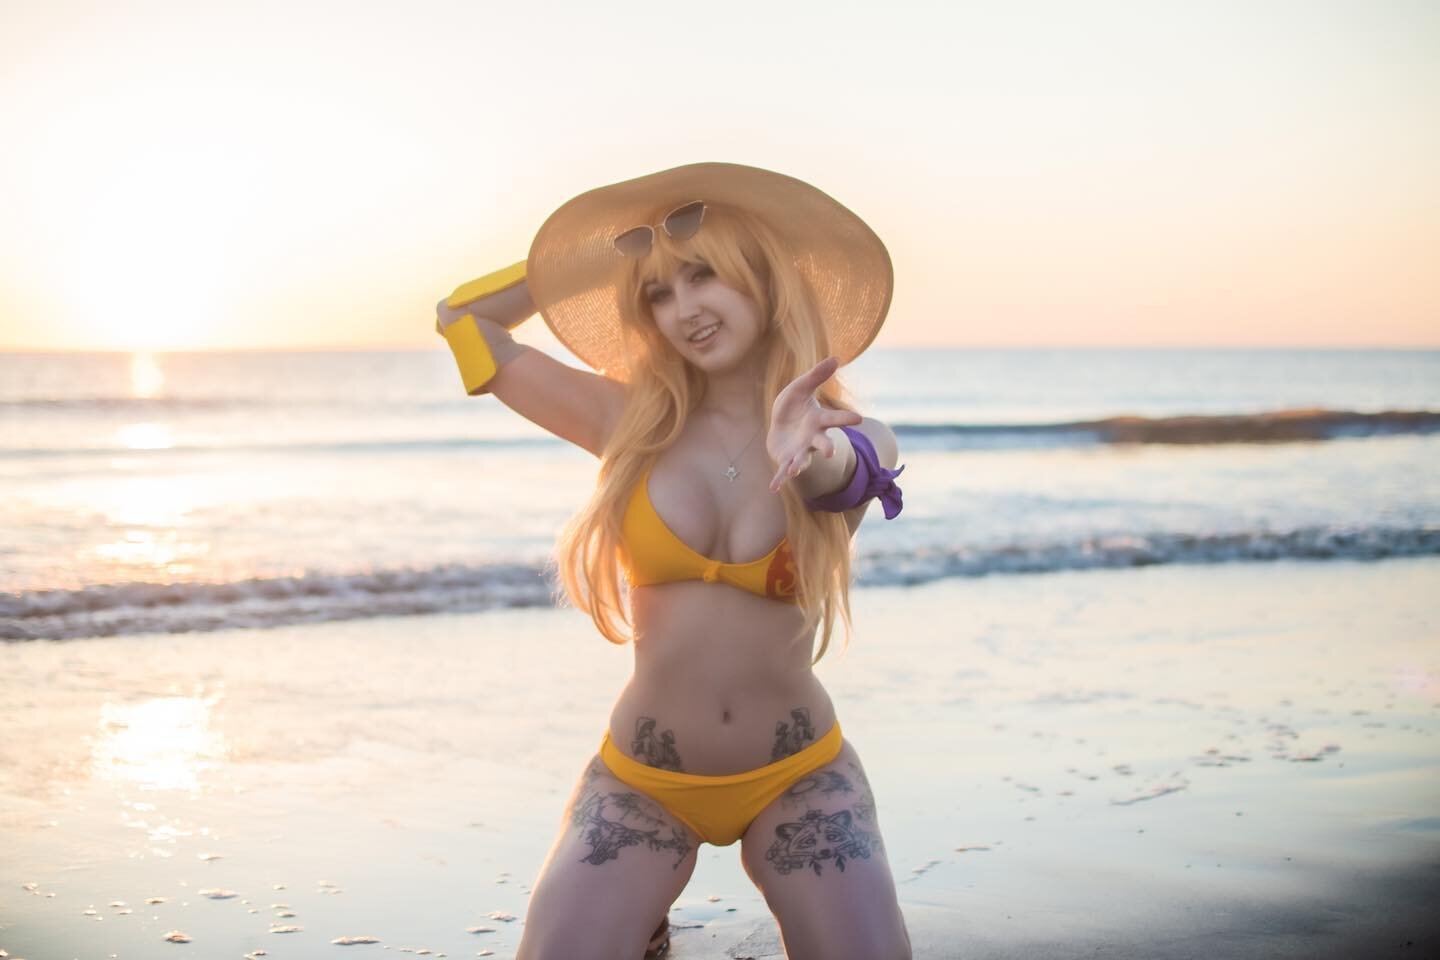 Throwback to this Yang photoshoot I did on the beach with Mangoloo! #yangxiaolong #rwby